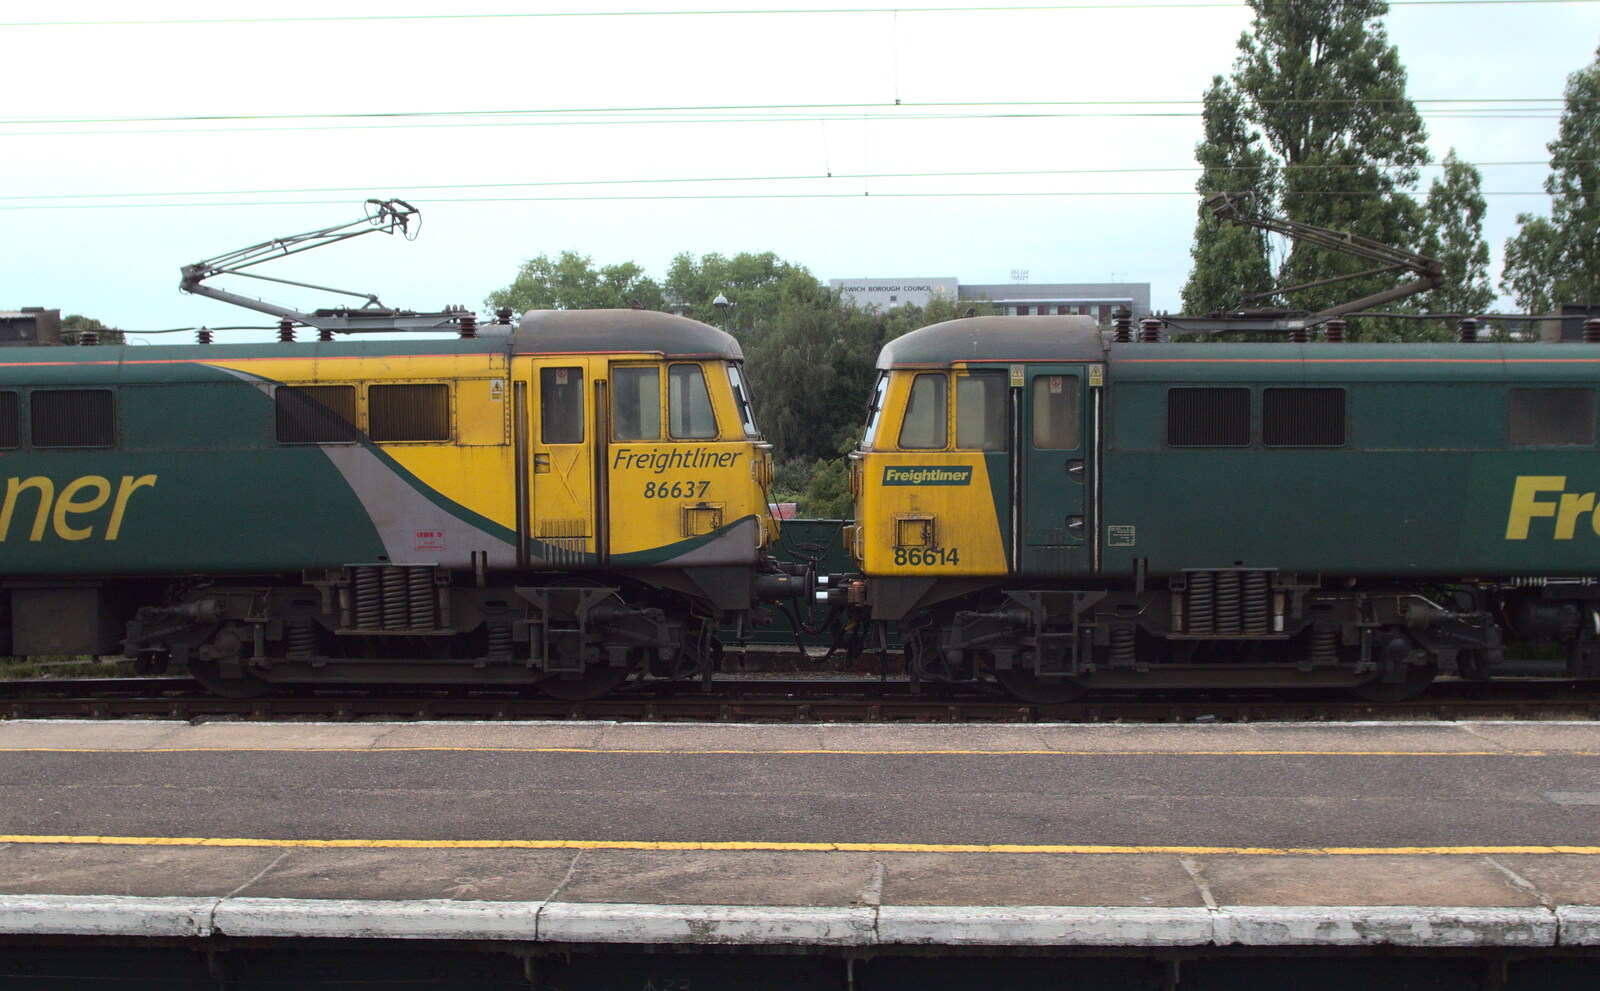 Two ancient 1960s Class 86 locos go head-to-head from SwiftKey Innovation Days, The Haymarket, London - 27th June 2014